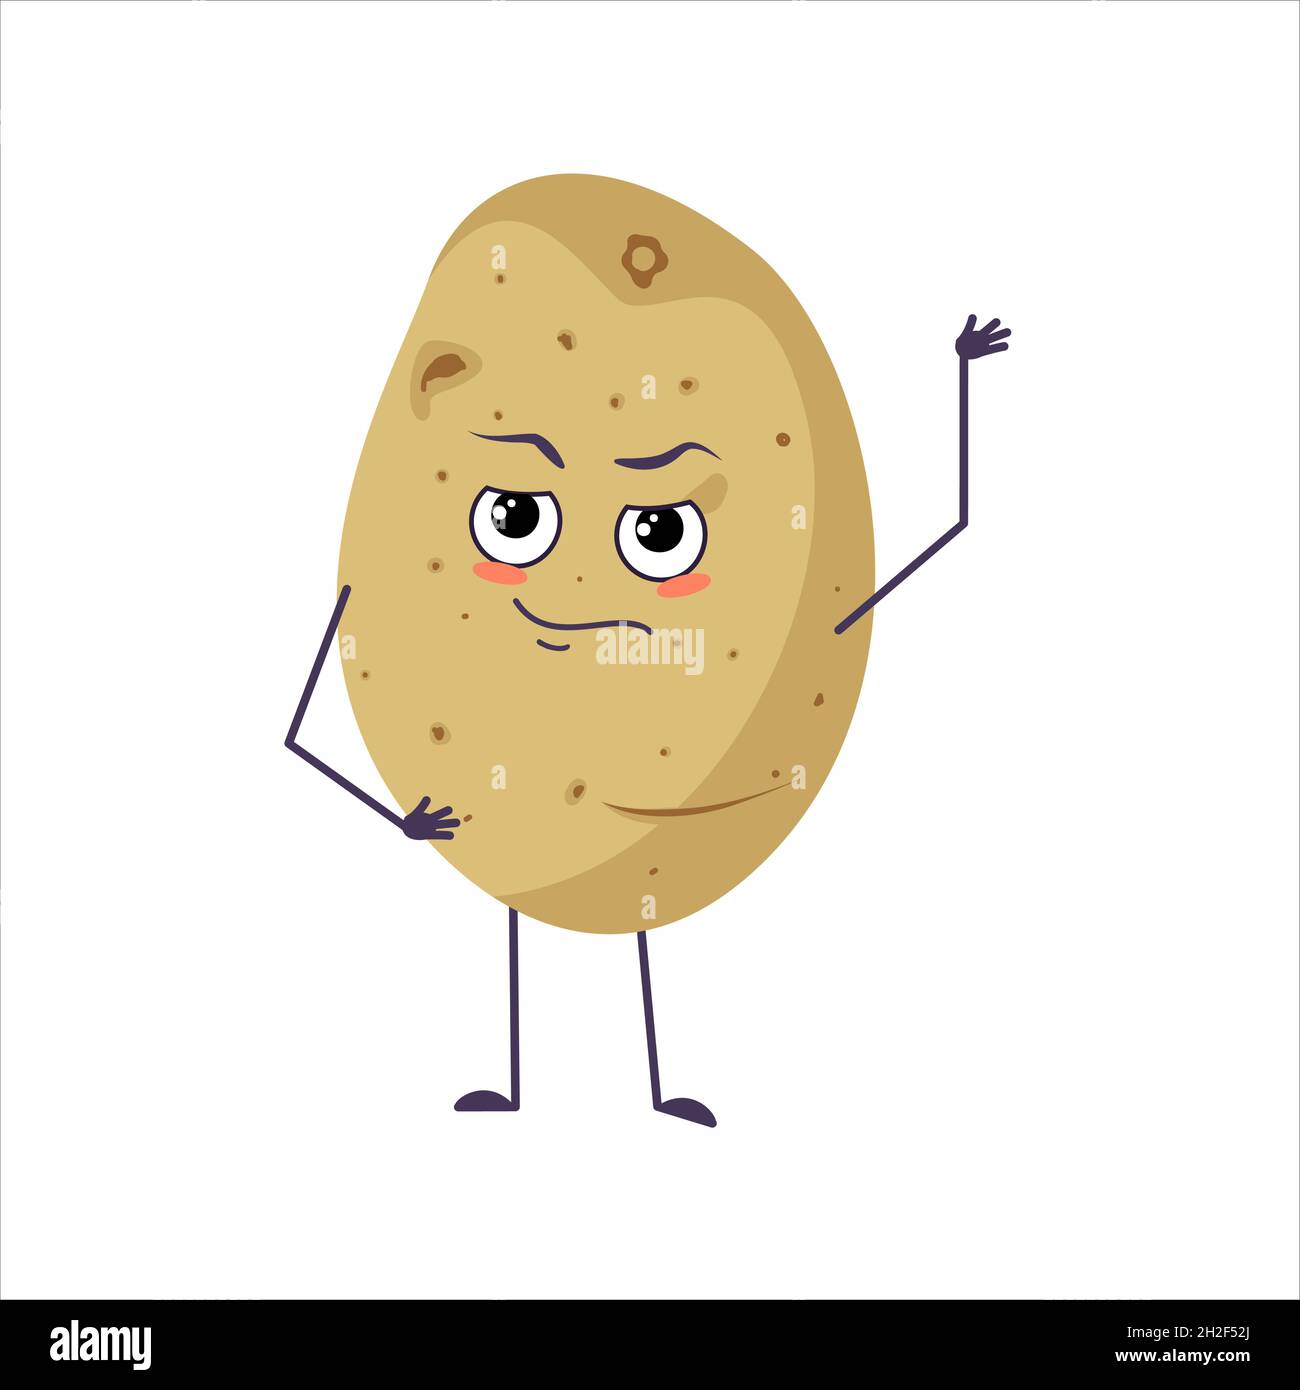 Cute Potato with a Face | Photographic Print